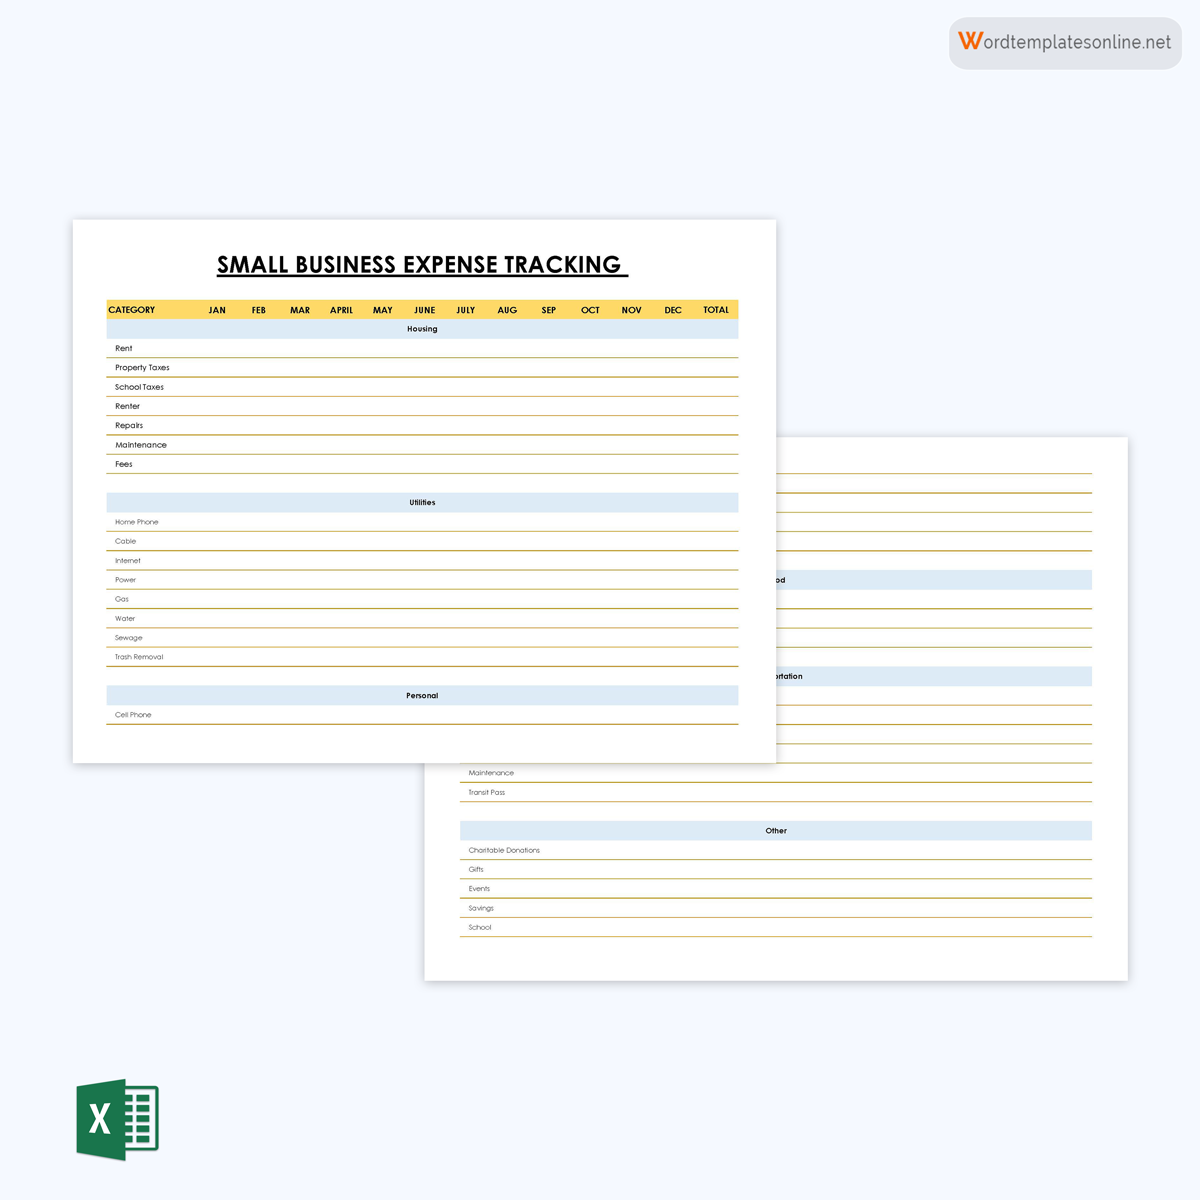 Free Printable Small Business Expense Tracking Report Template 01 as Excel Format